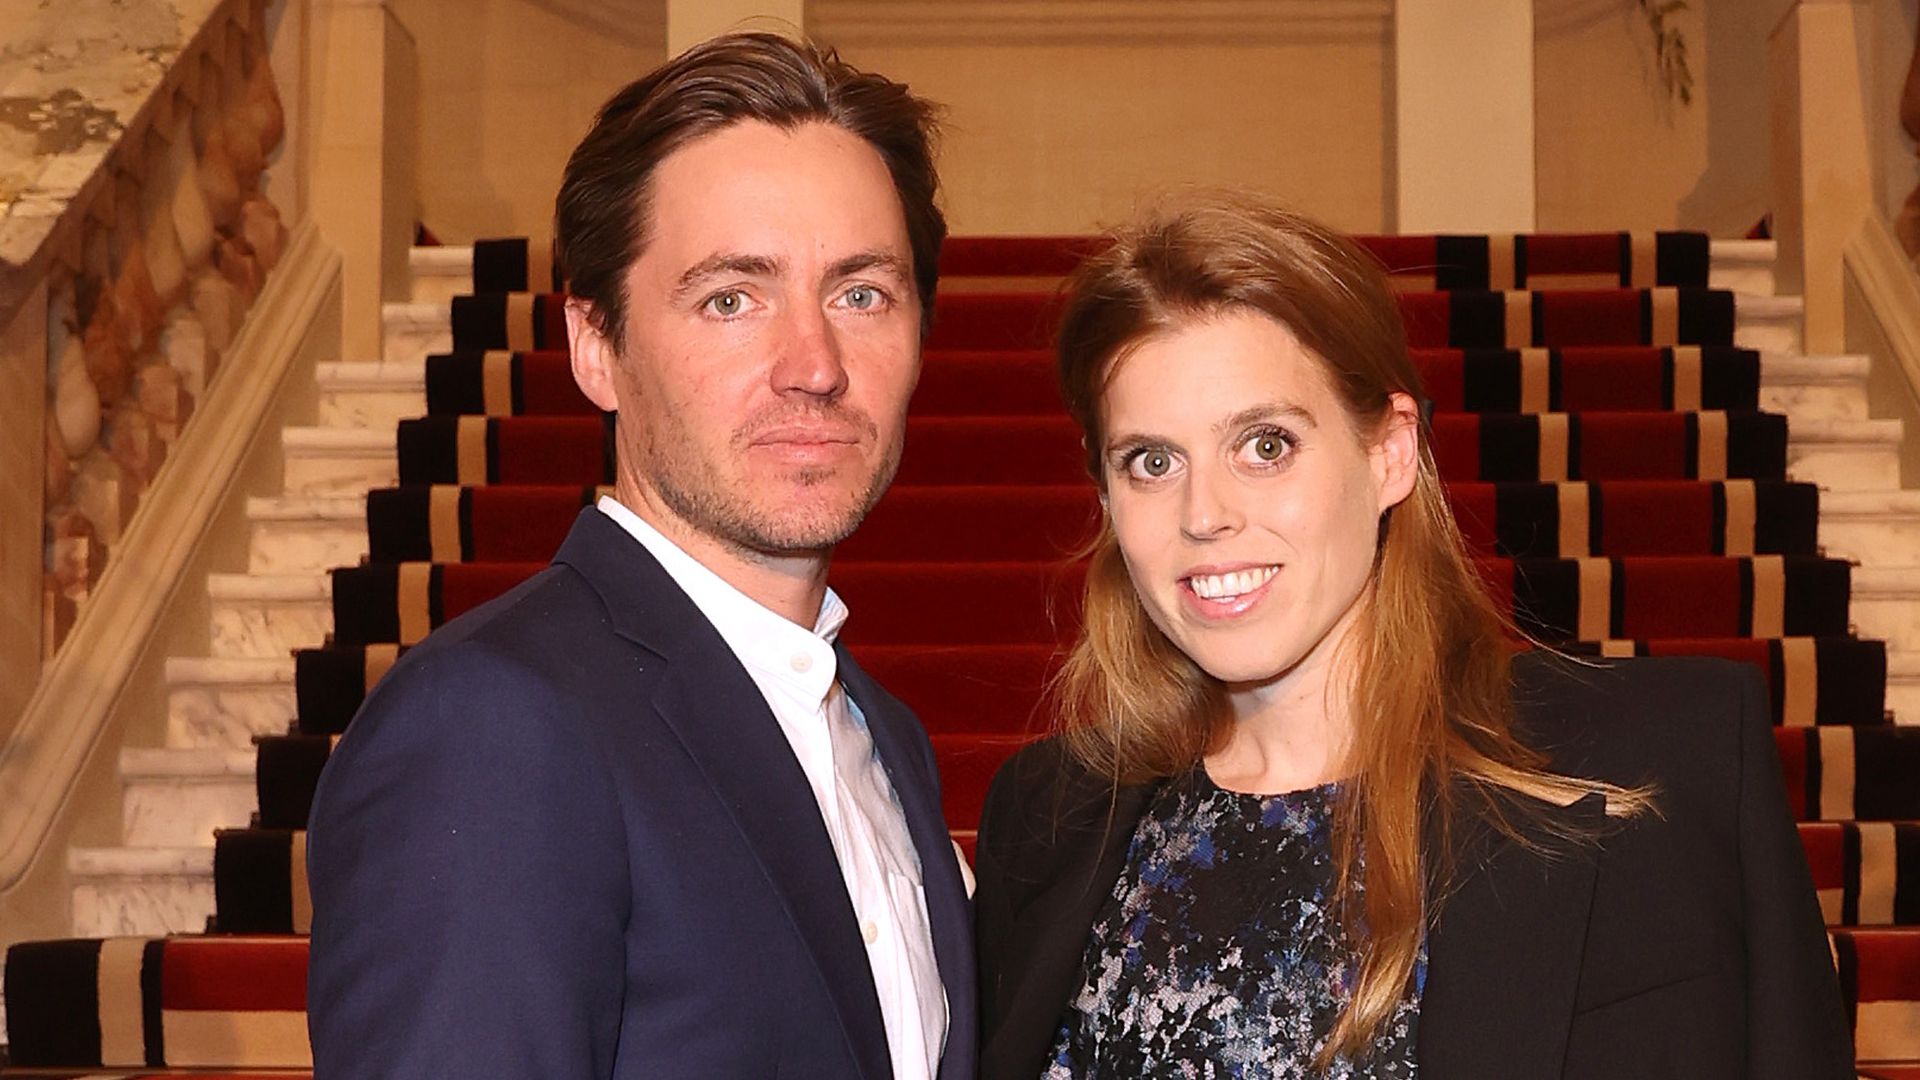 Princess Beatrice's stepson's funky bedroom could be a toy shop as he marks big milestone